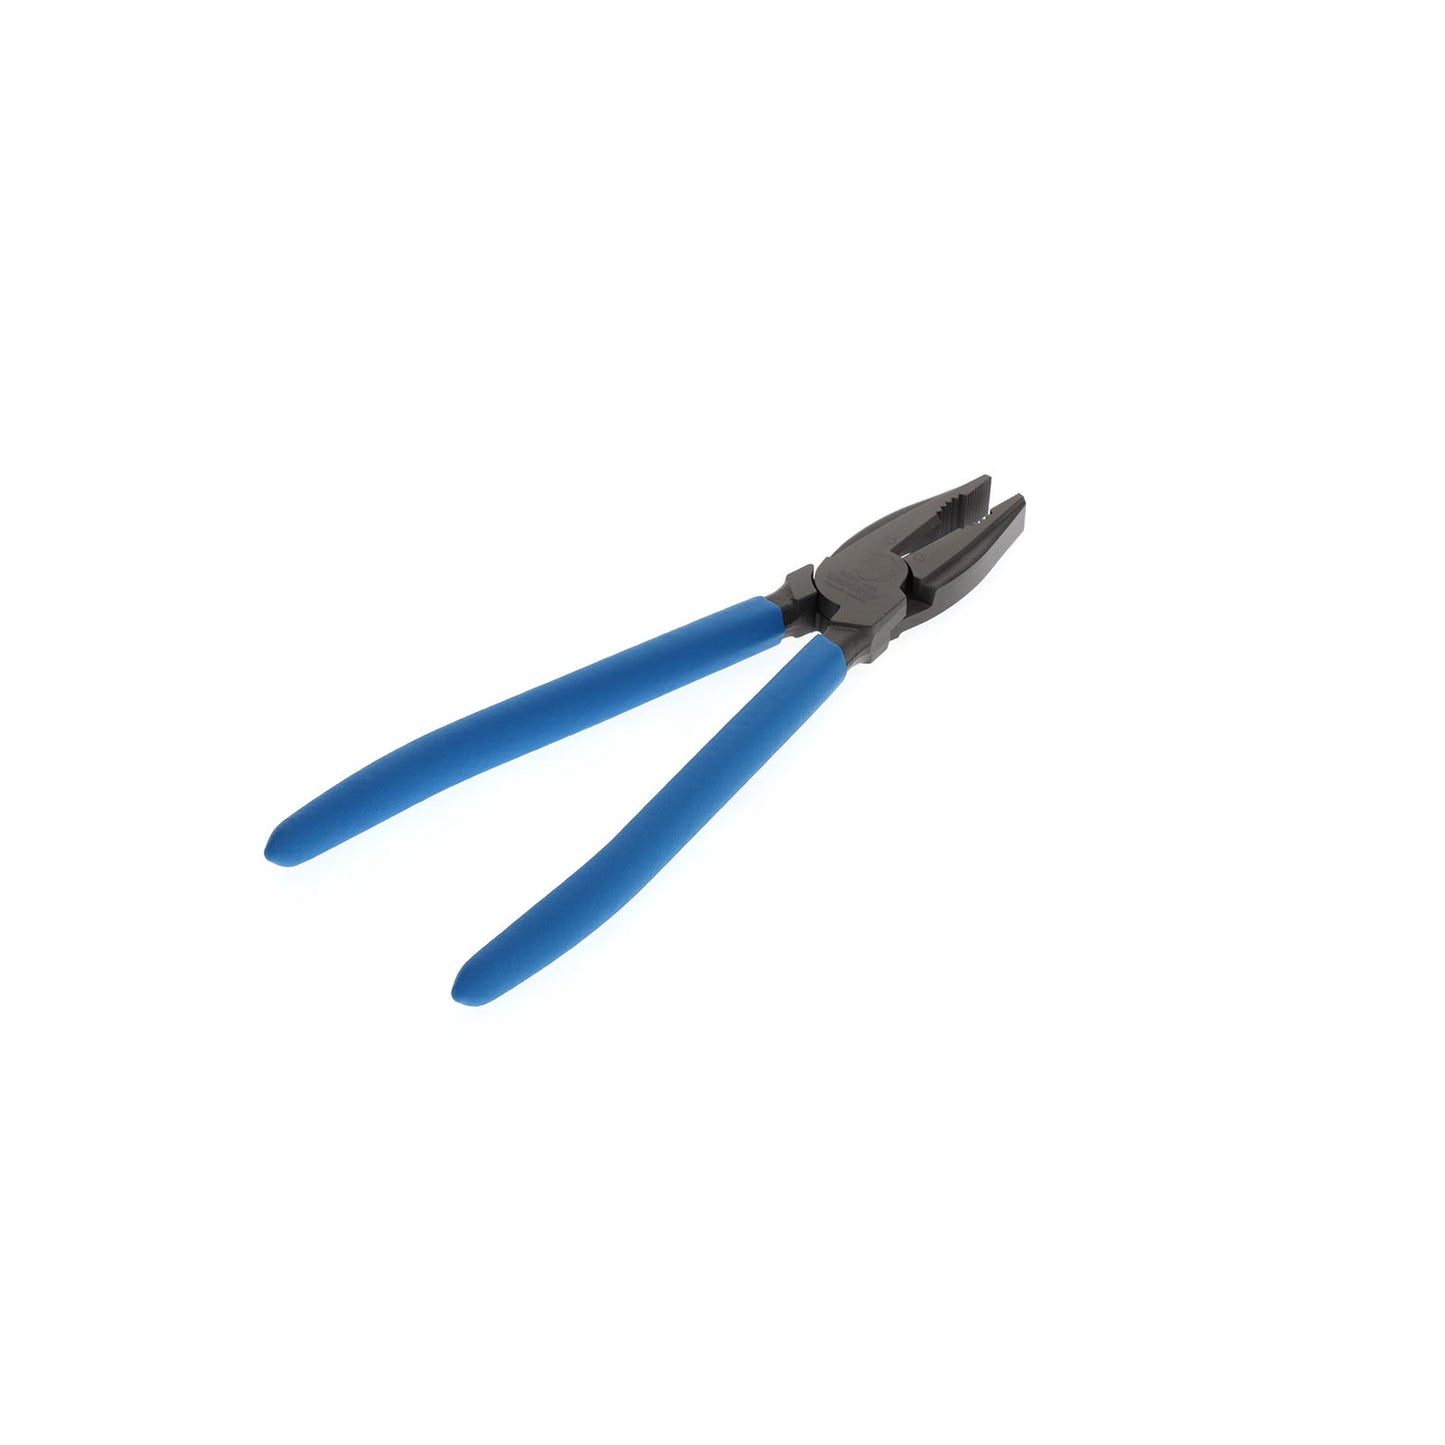 GEDORE 8250-225 TL - Universal force pliers 225 mm (6708040)